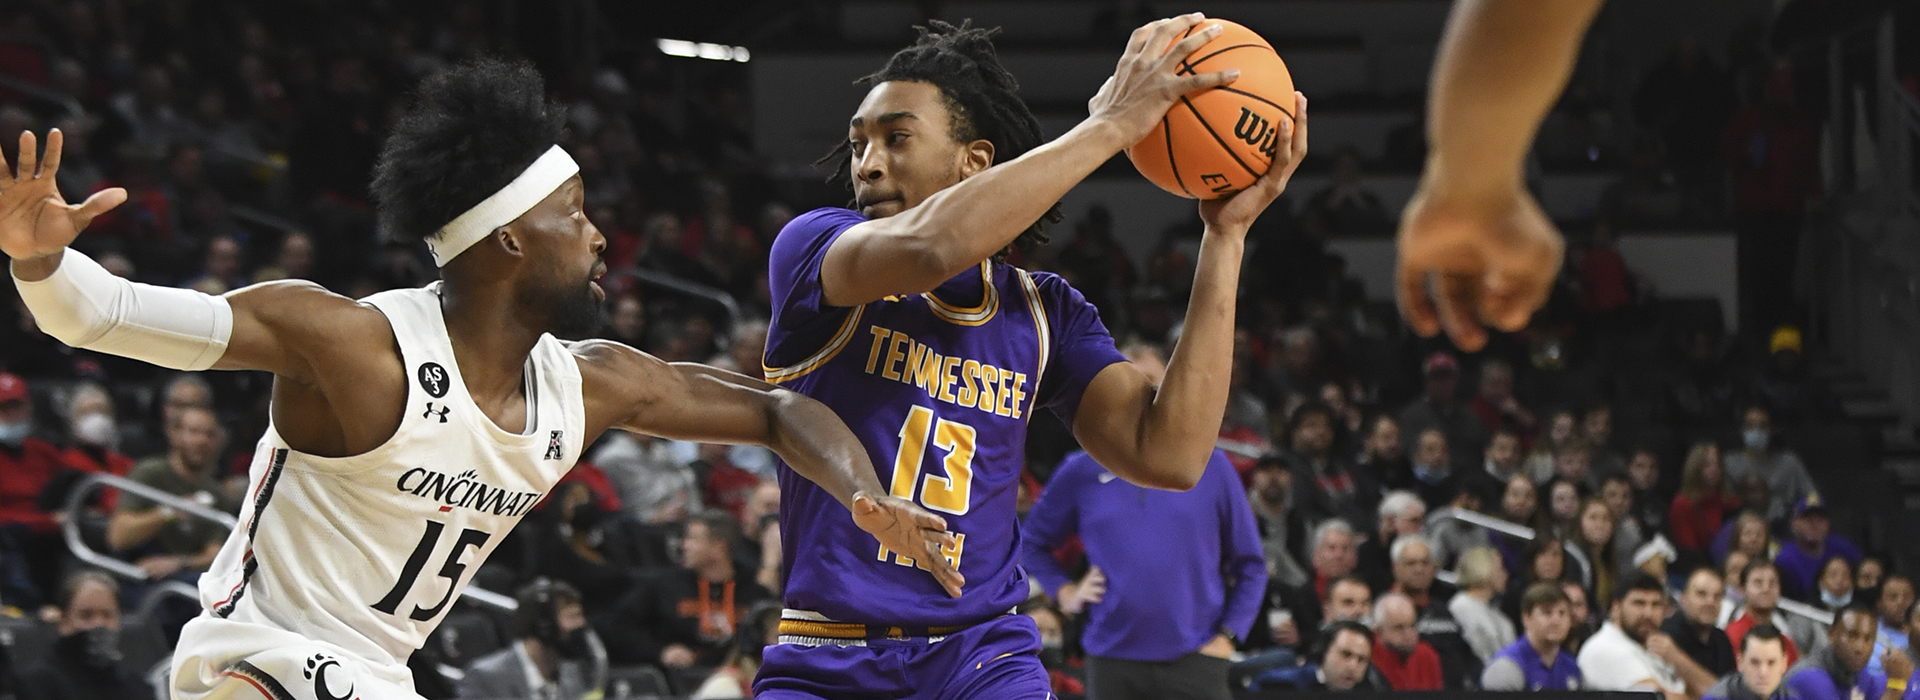 Purple and gold fall at Cincinnati in final non-conference game of 2021-22 season